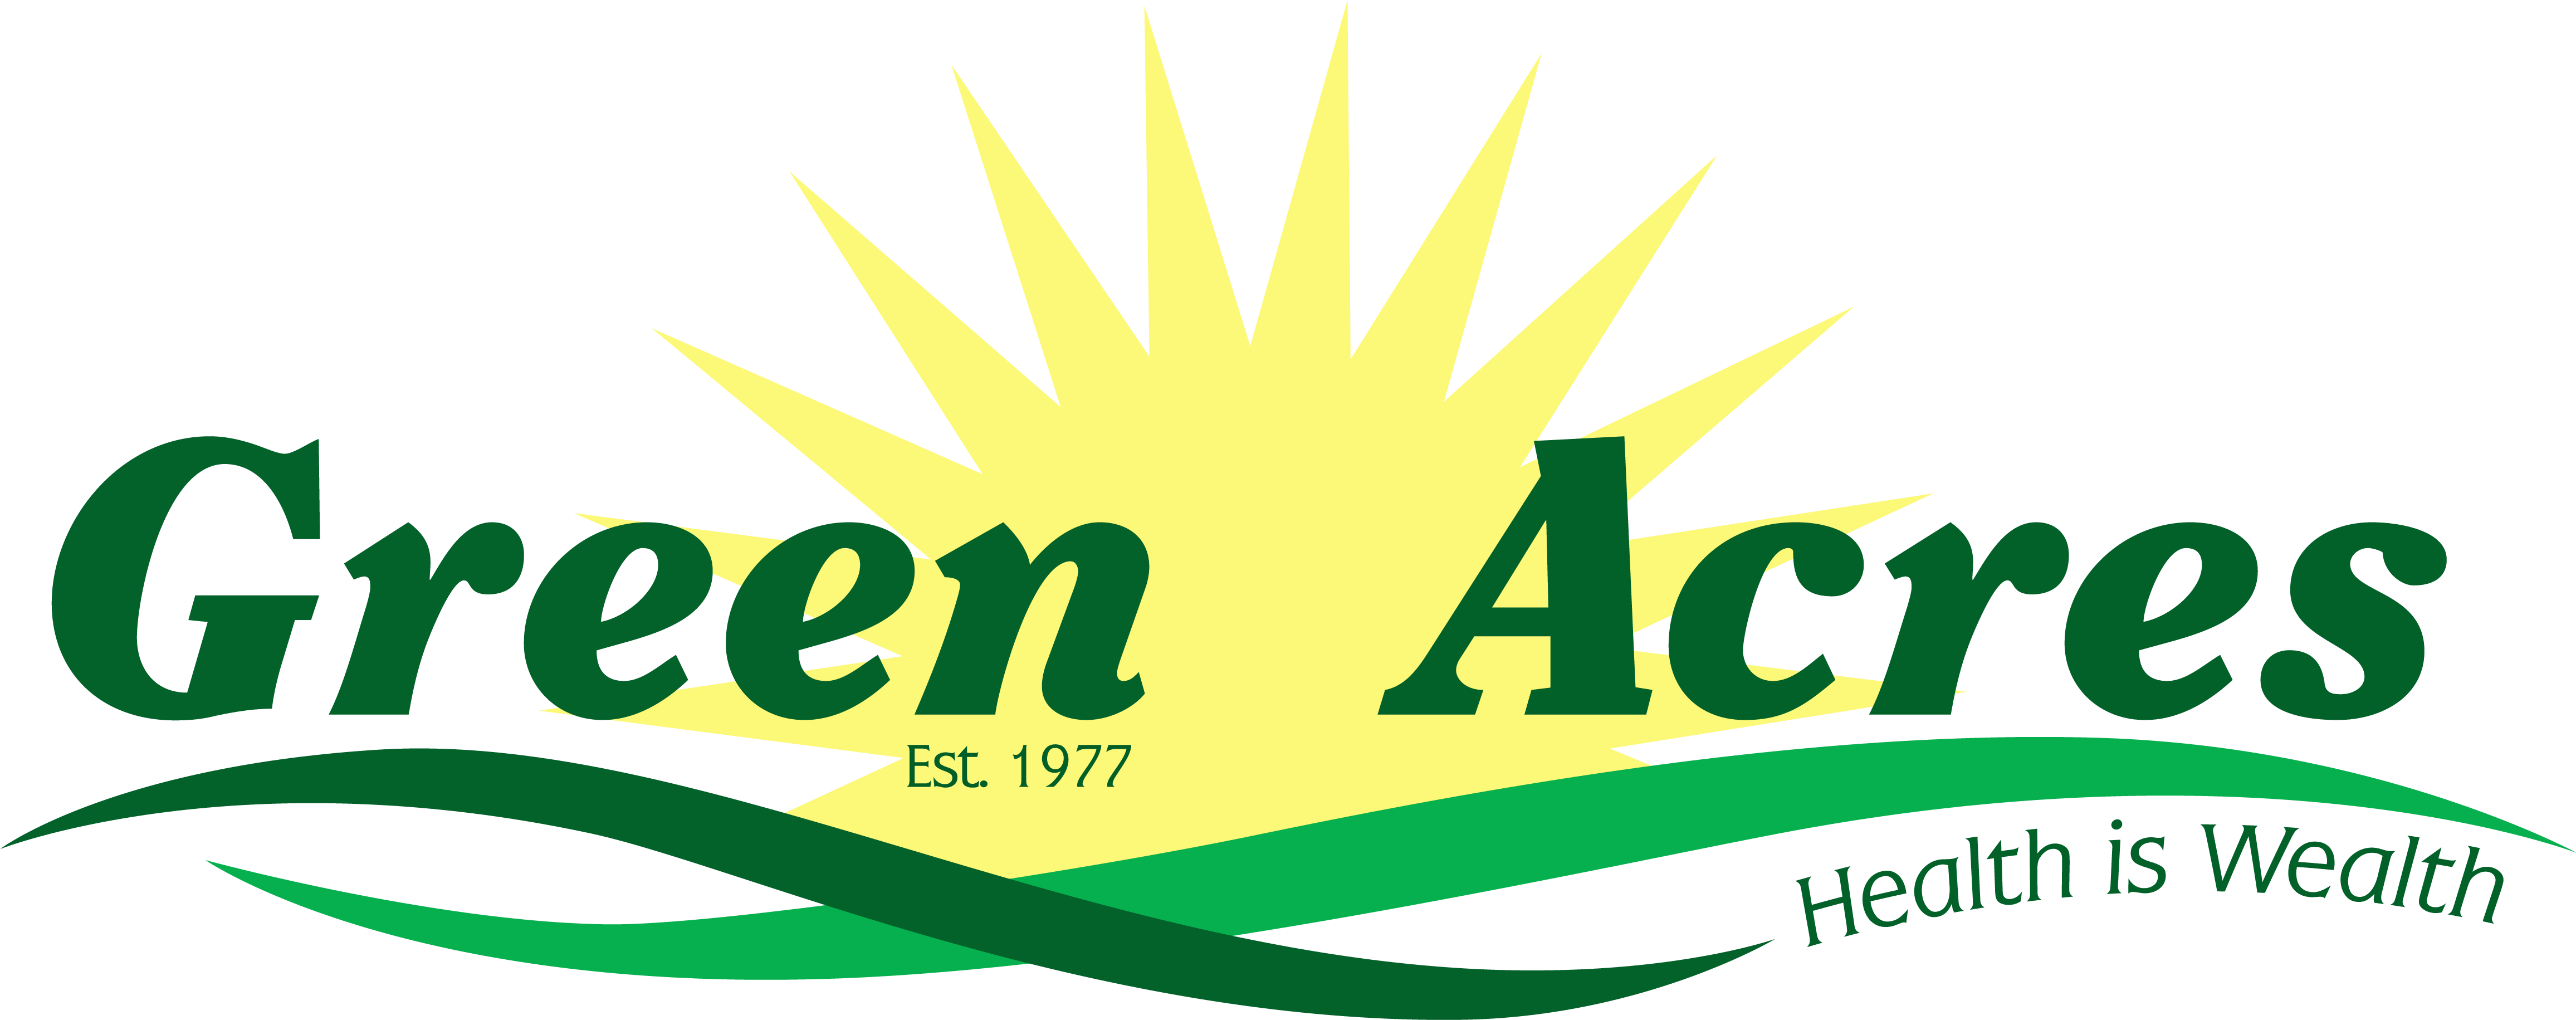 Green Acres Health Food Store - Green Acres Food (4800x1875)